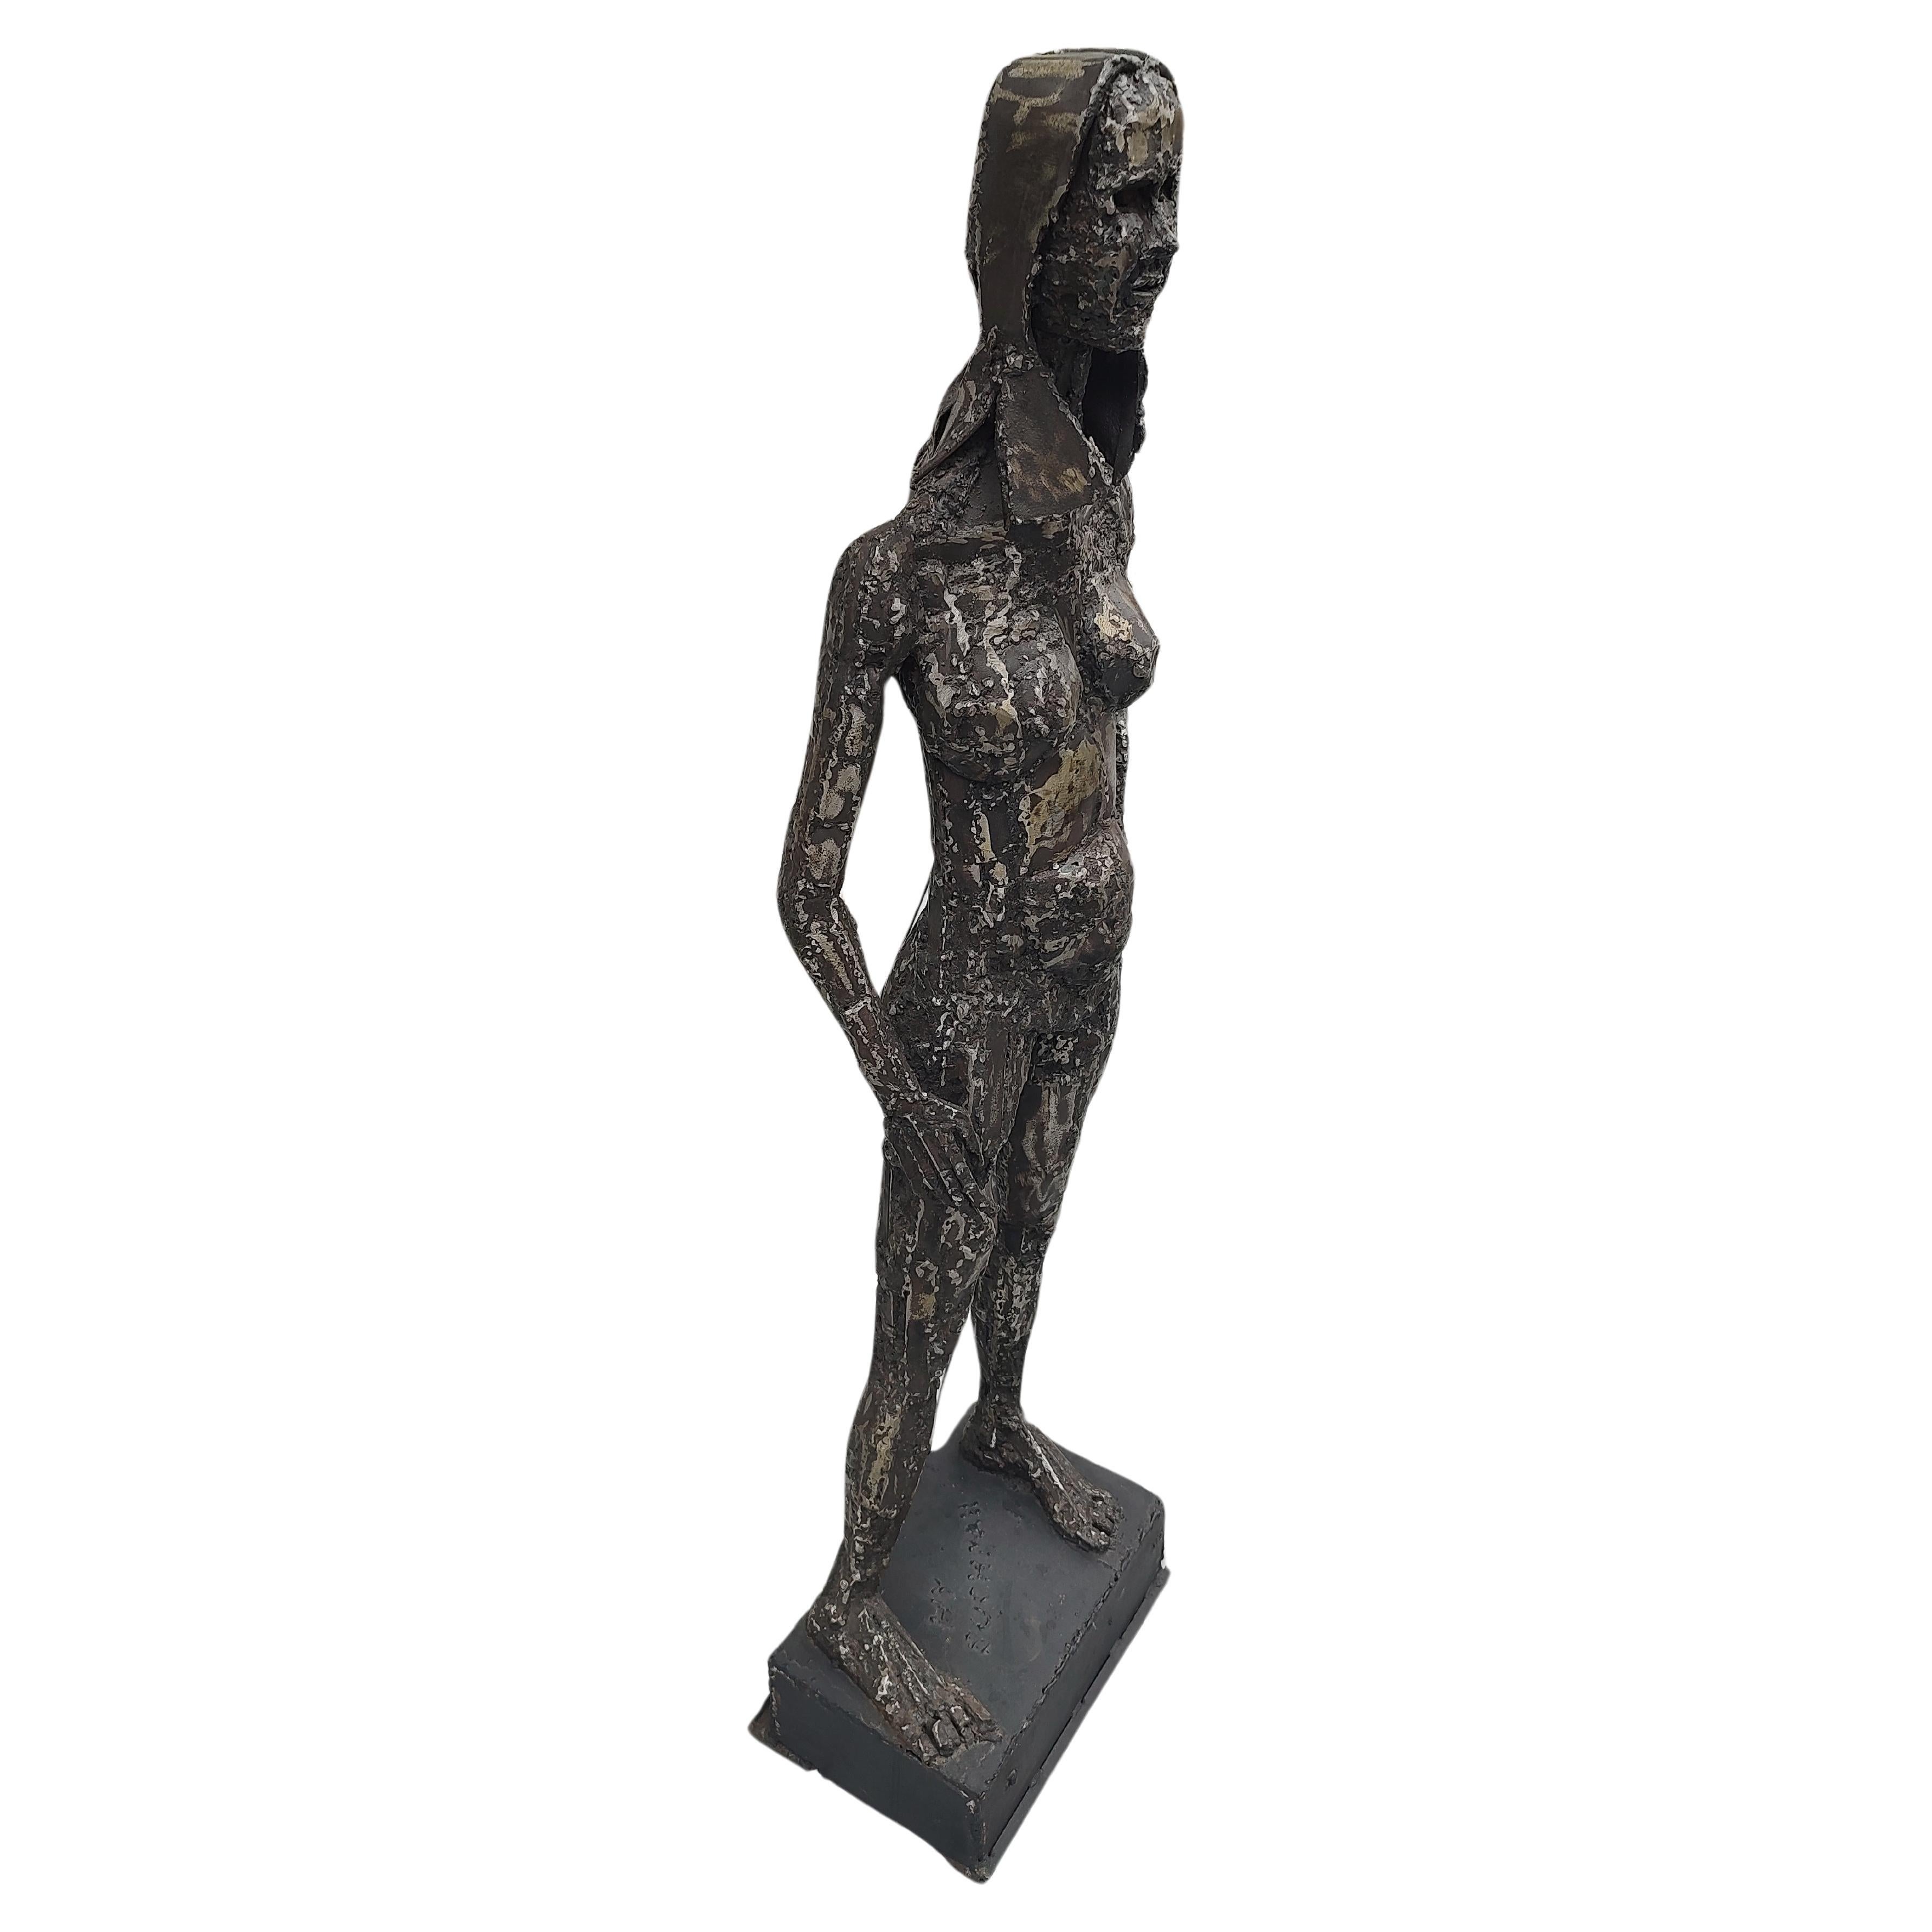 American Mid Century Modern Brutalist Mixed Metals Figurative Sculpture of a Woman C1970 For Sale